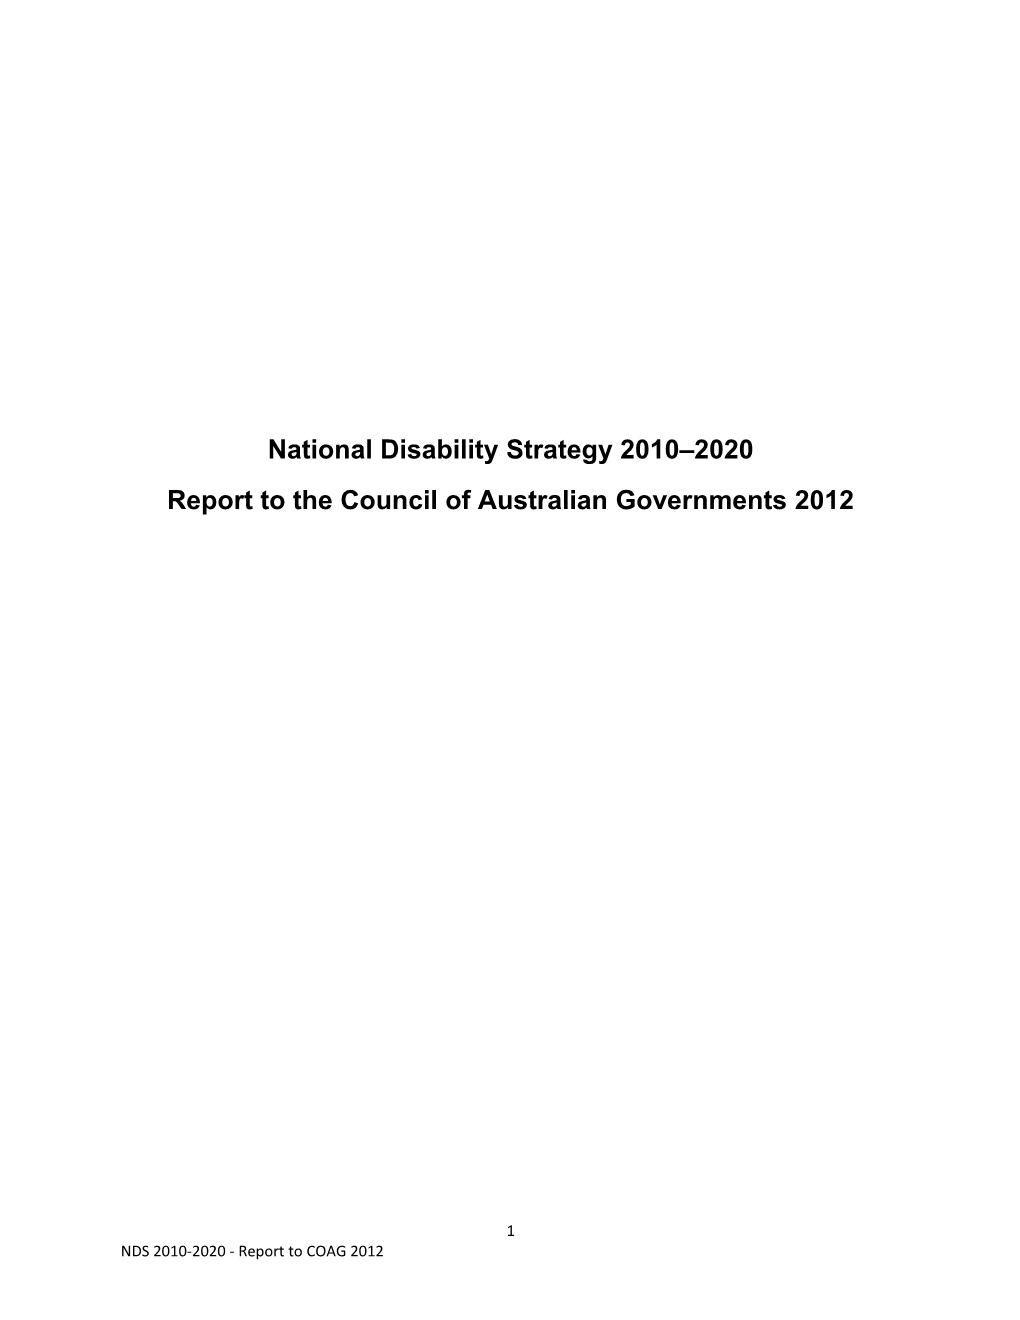 2010-2020 National Disability Strategy Report to COAG 2012